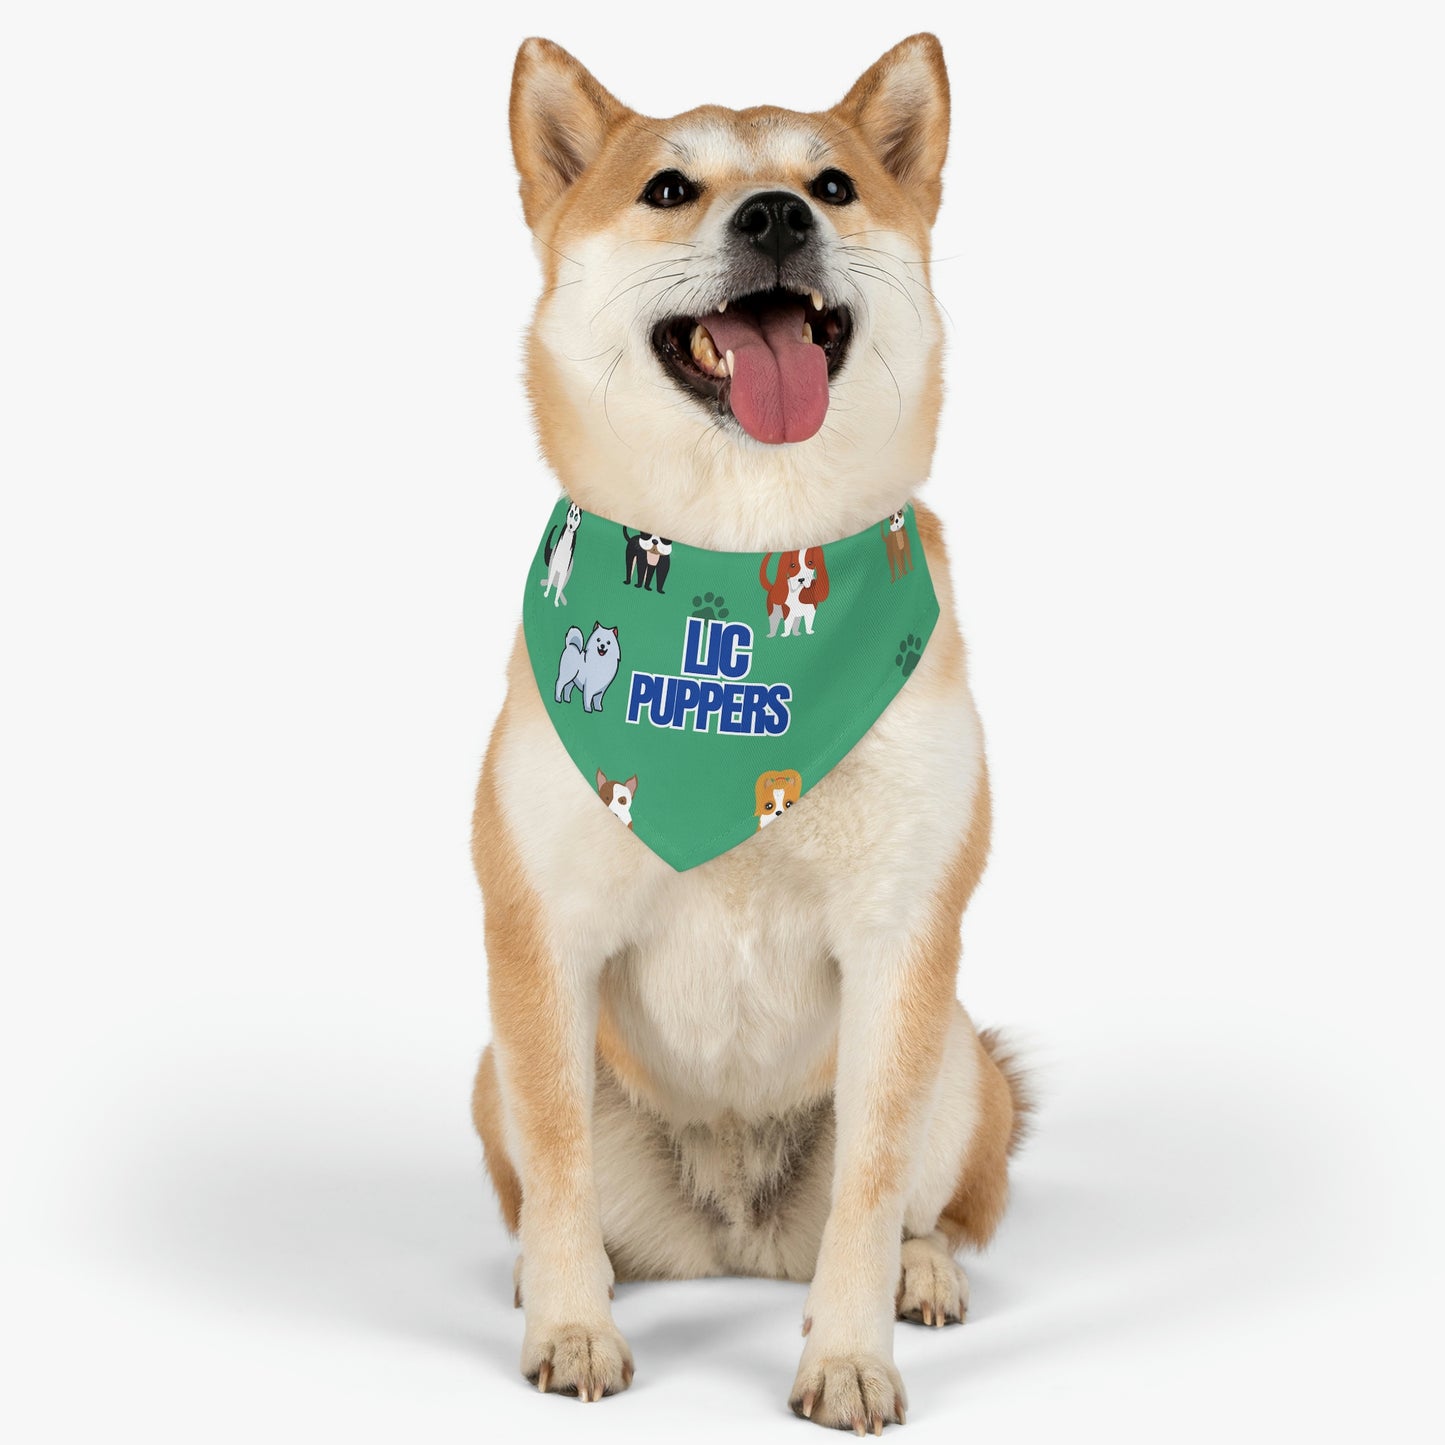 LIC Puppers - Green